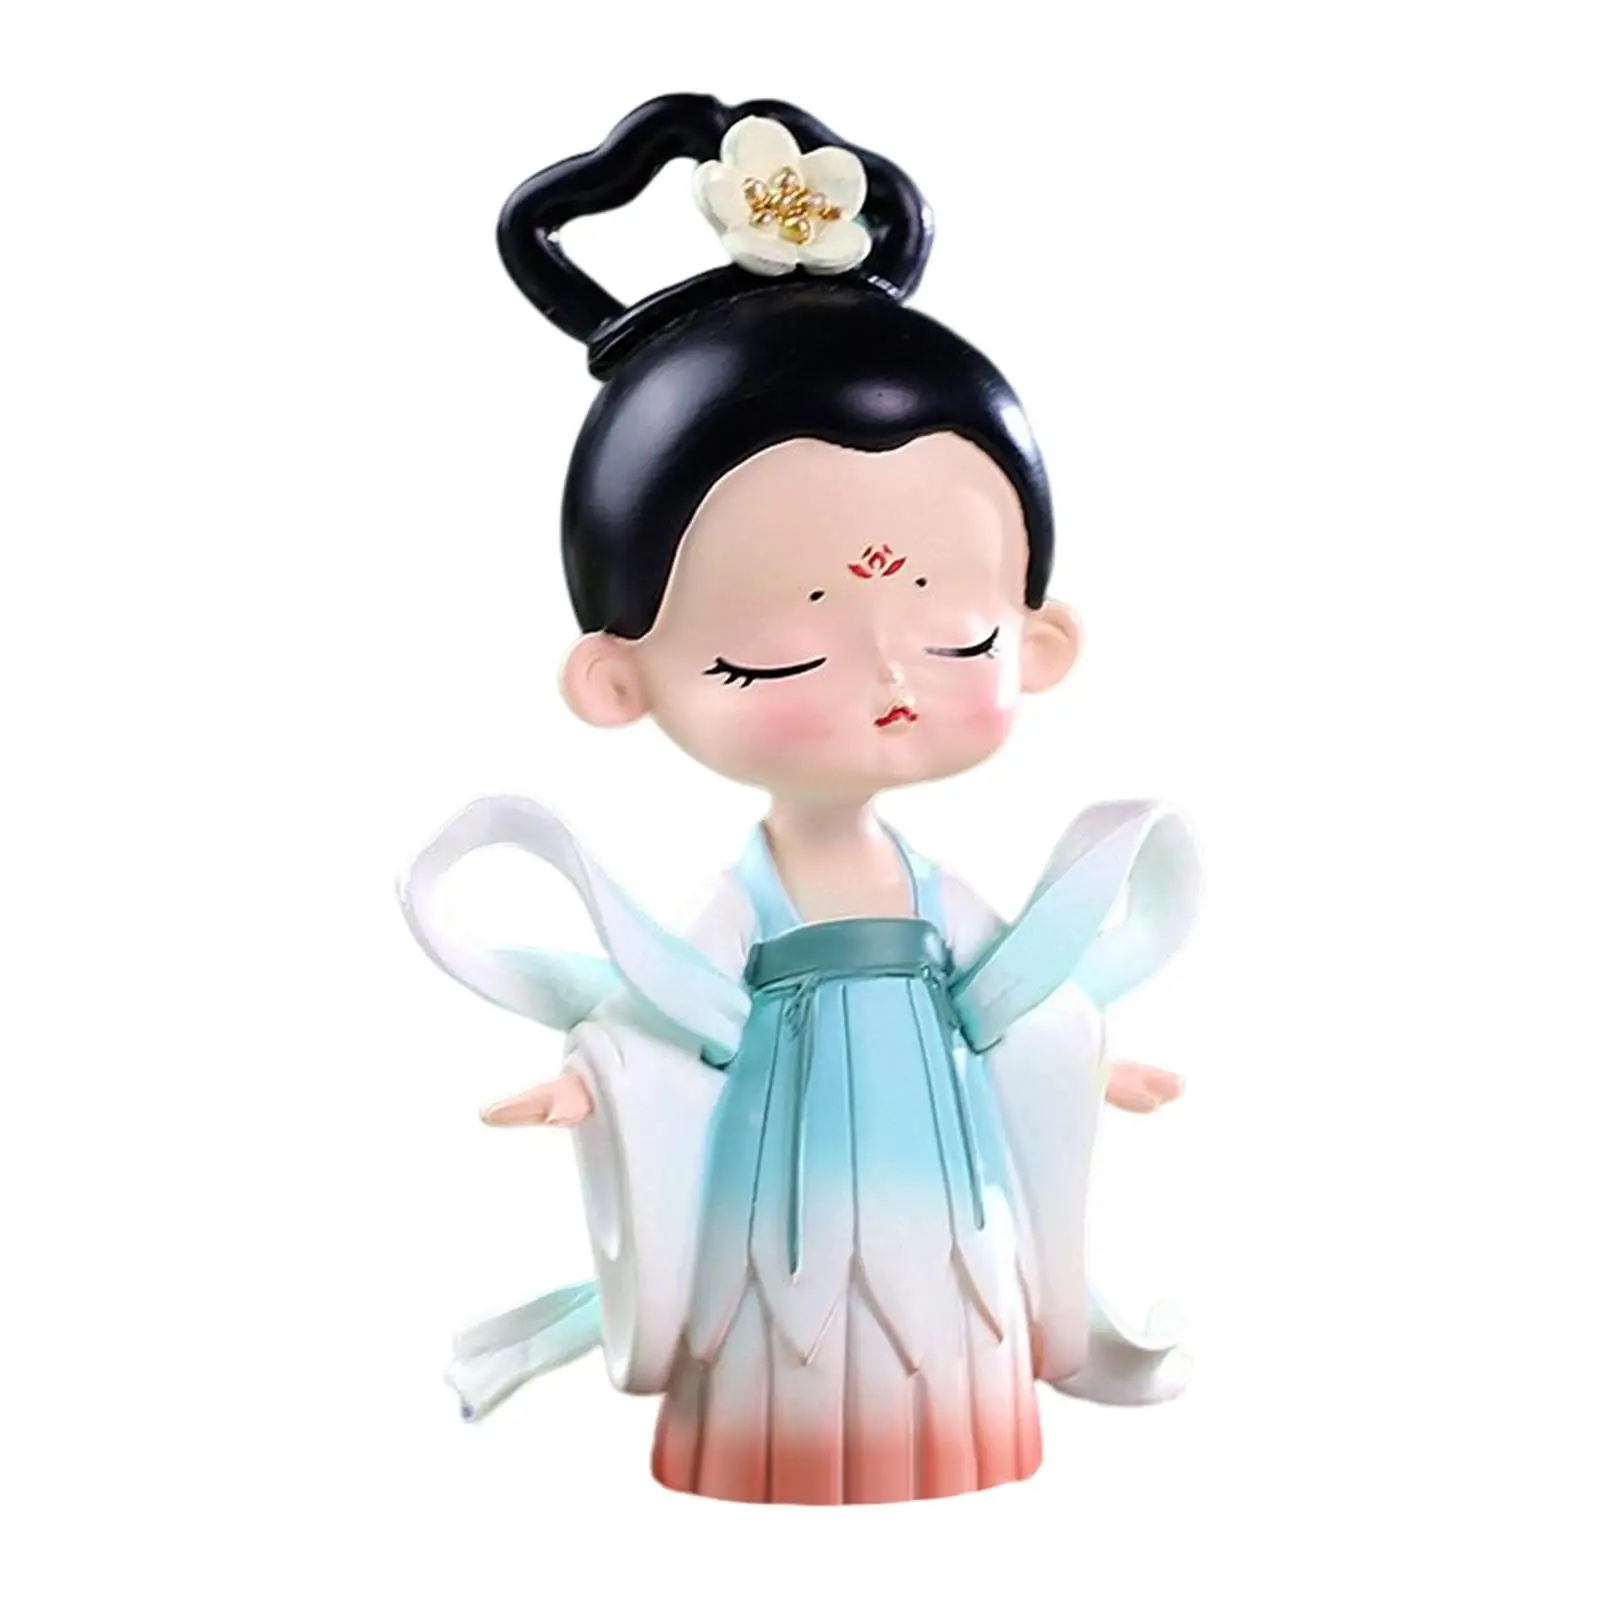 Creative Ancient Girl Figurines Statue Traditional Resin Crafts Handicrafts